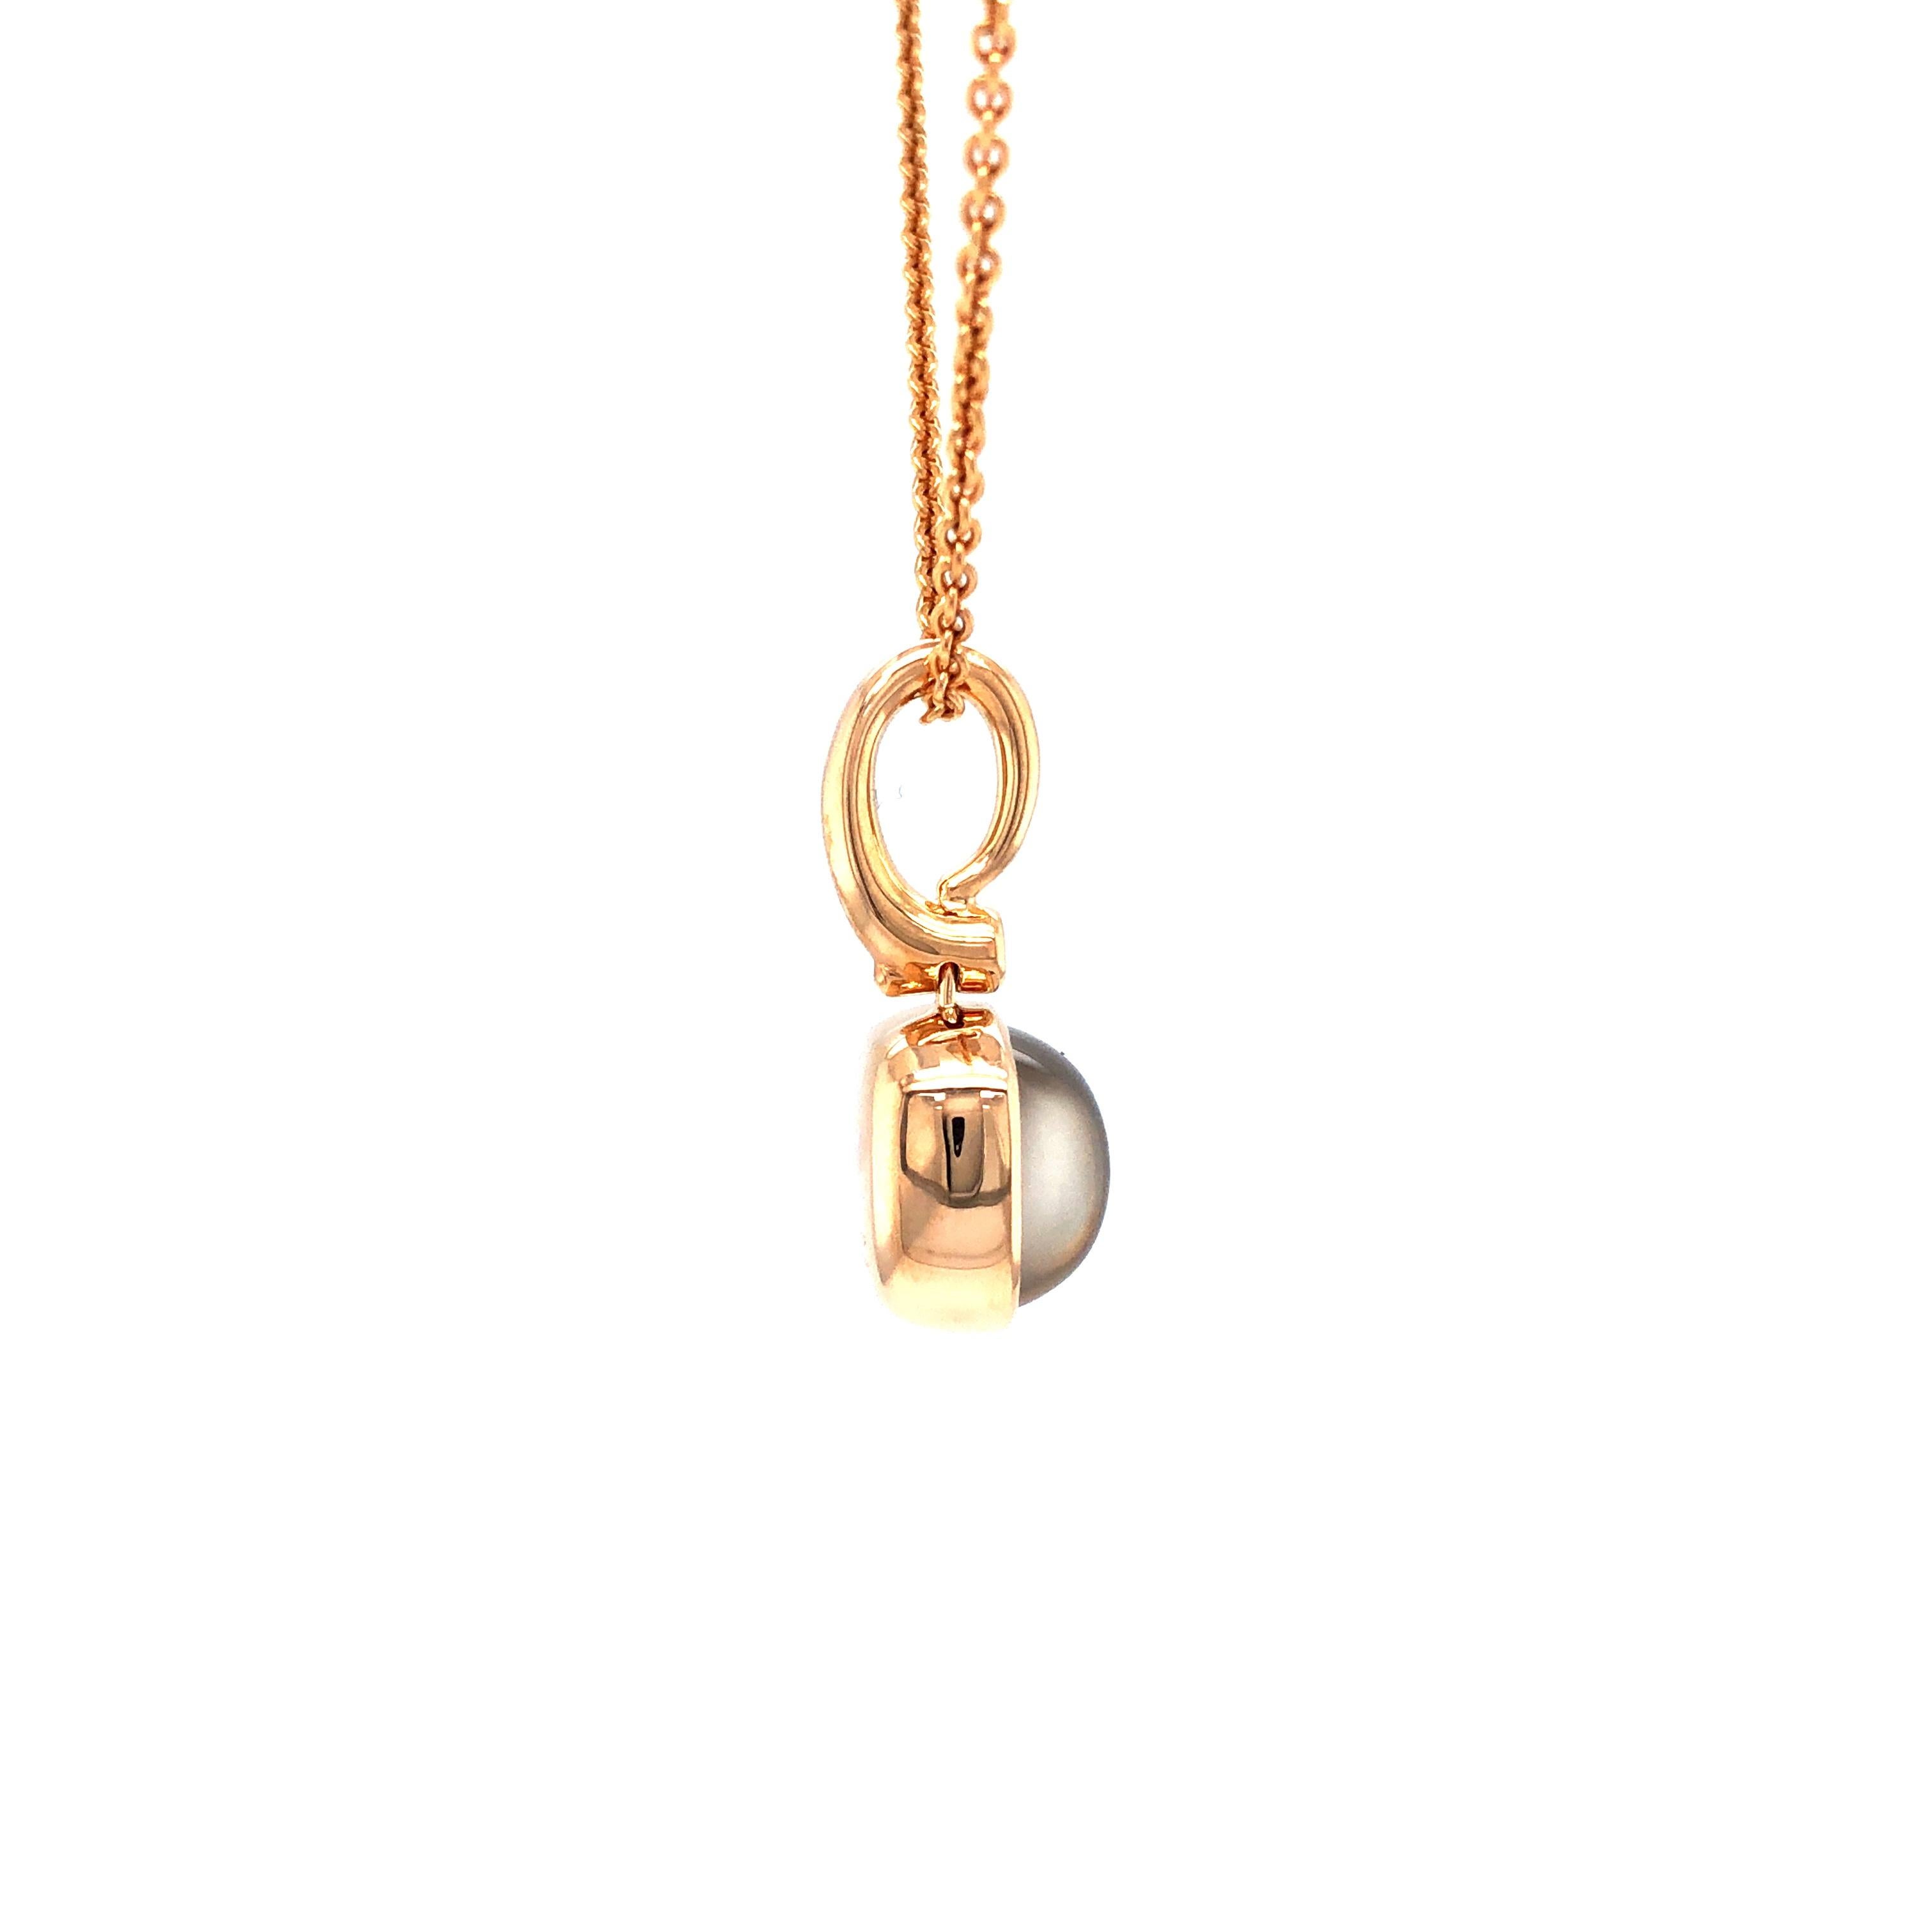 Victor Mayer cushion shaped pendant necklace 18k rose gold, Era collection, 1 diamond 0.04 ct G VS brilliant cut, white moon stone over guilloche disc

About the creator Victor Mayer
Victor Mayer is internationally renowned for elegant timeless